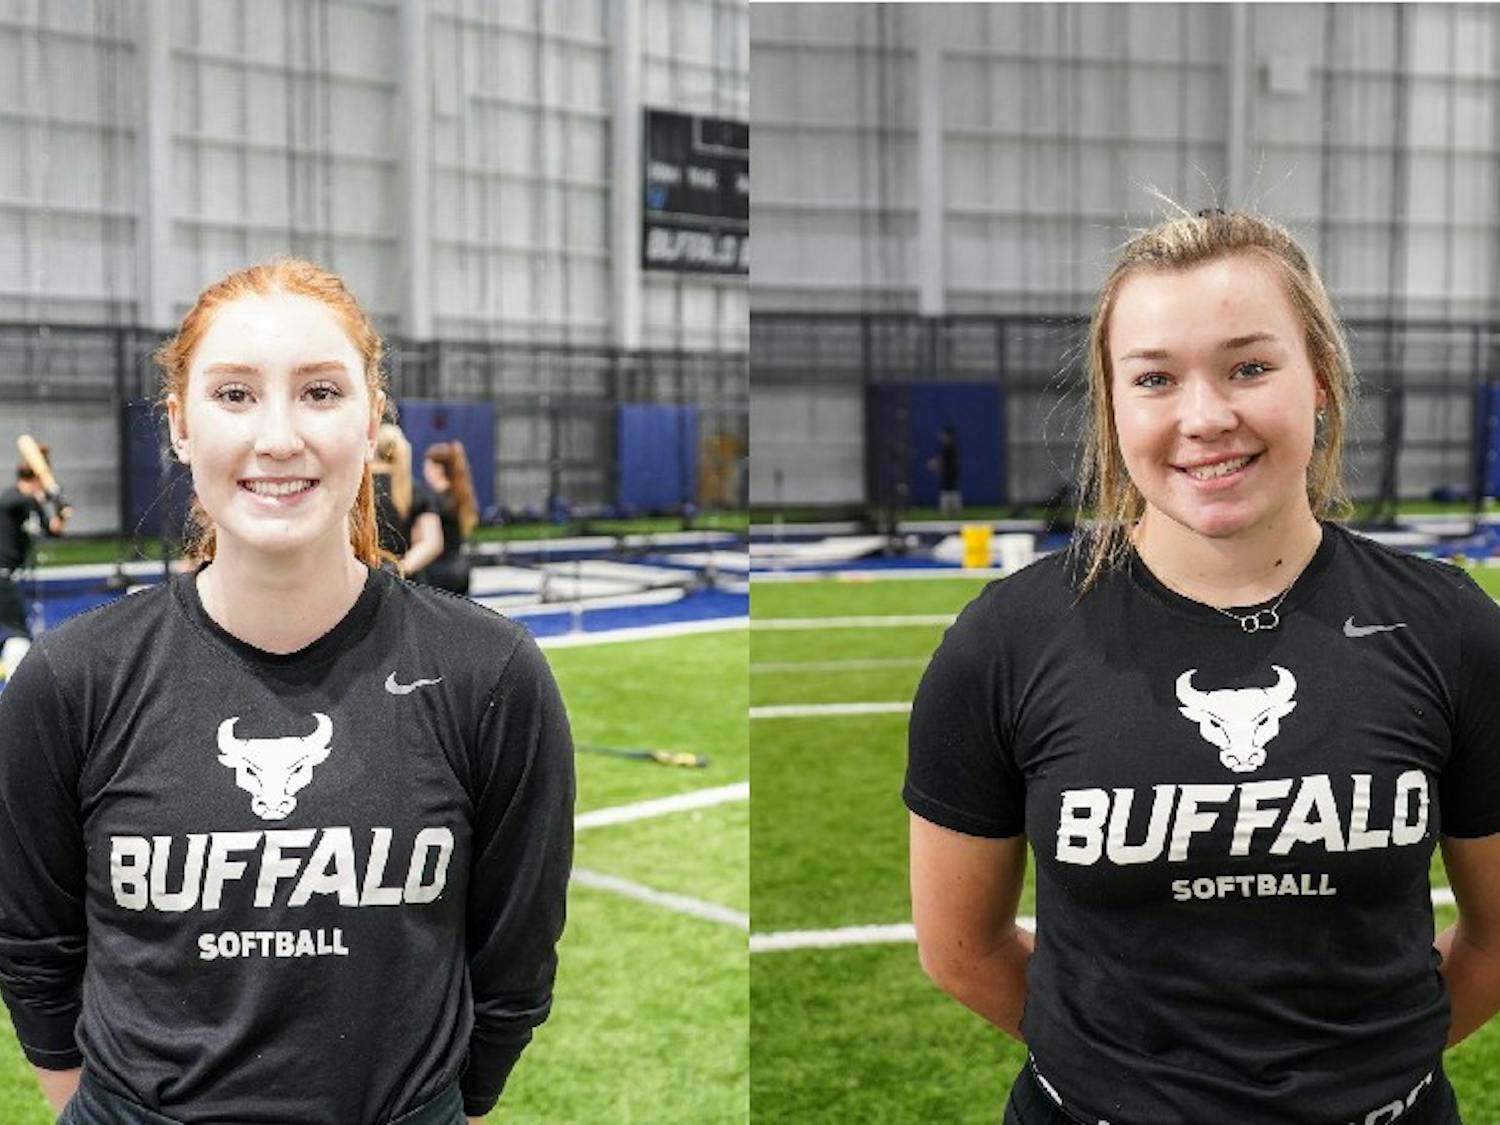 Freshmen pitchers Alexis Lucyshyn and Madelyn Hickingbottom discuss their experiences being on the UB women's softball team during practice at the UB fieldhouse on Tuesday.